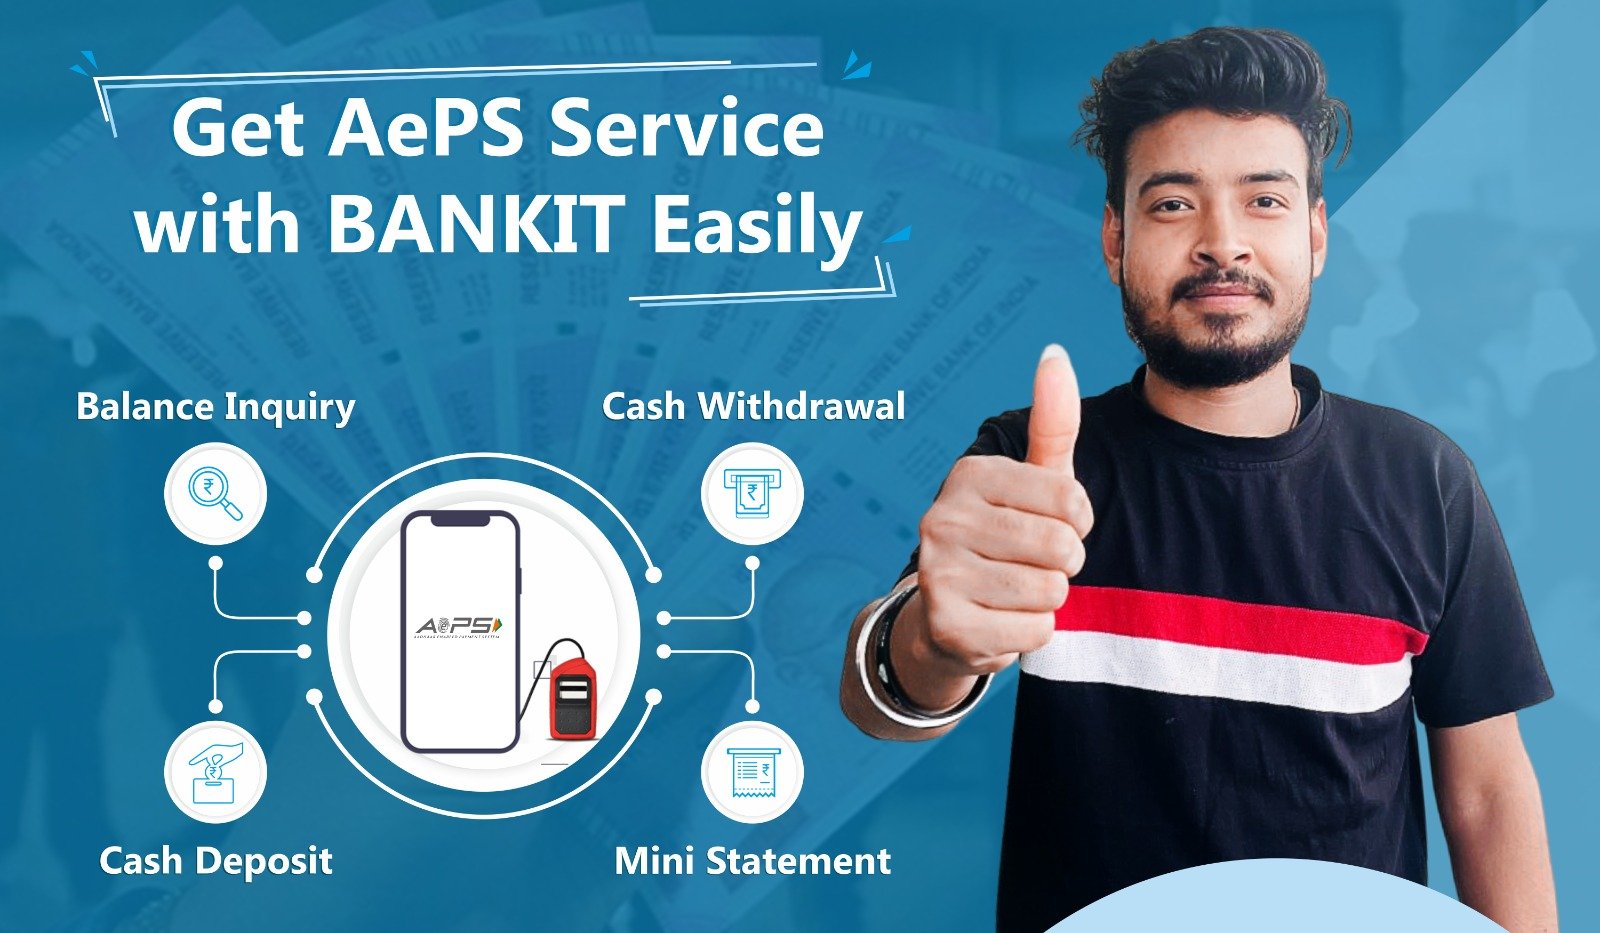 Get AePS Service easily and conveniently